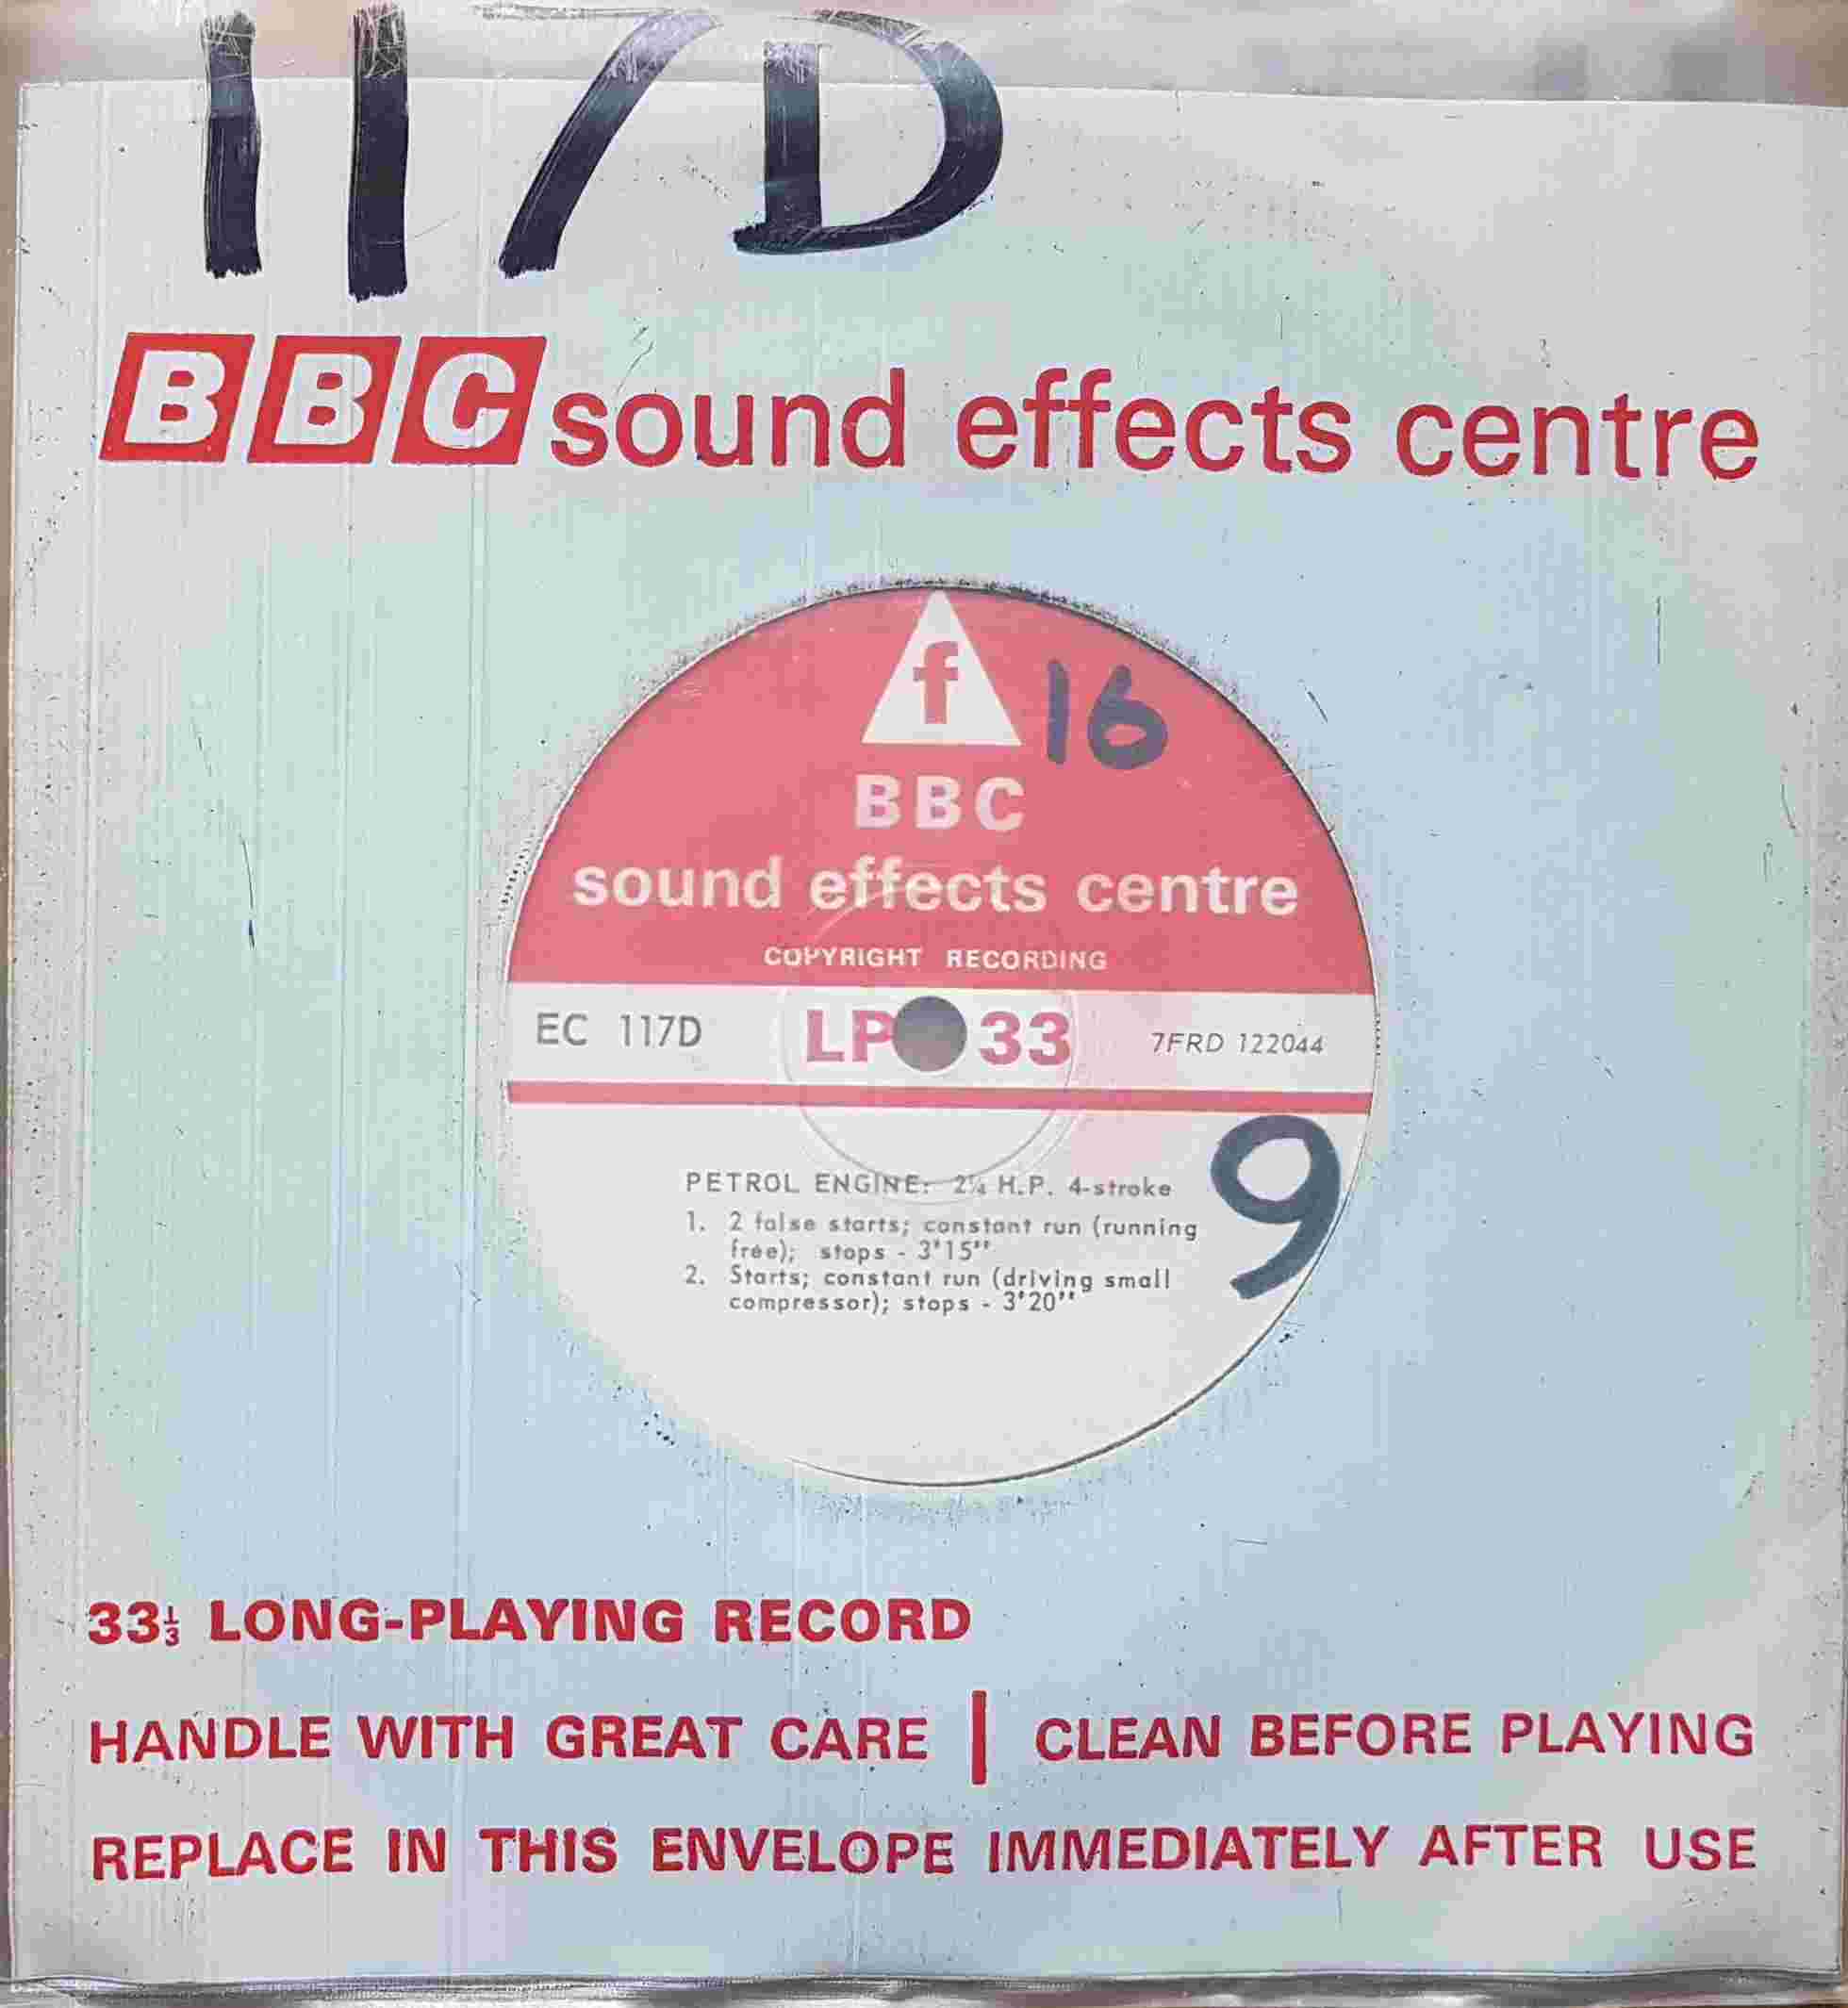 Picture of EC 117D Engines by artist Not registered from the BBC singles - Records and Tapes library